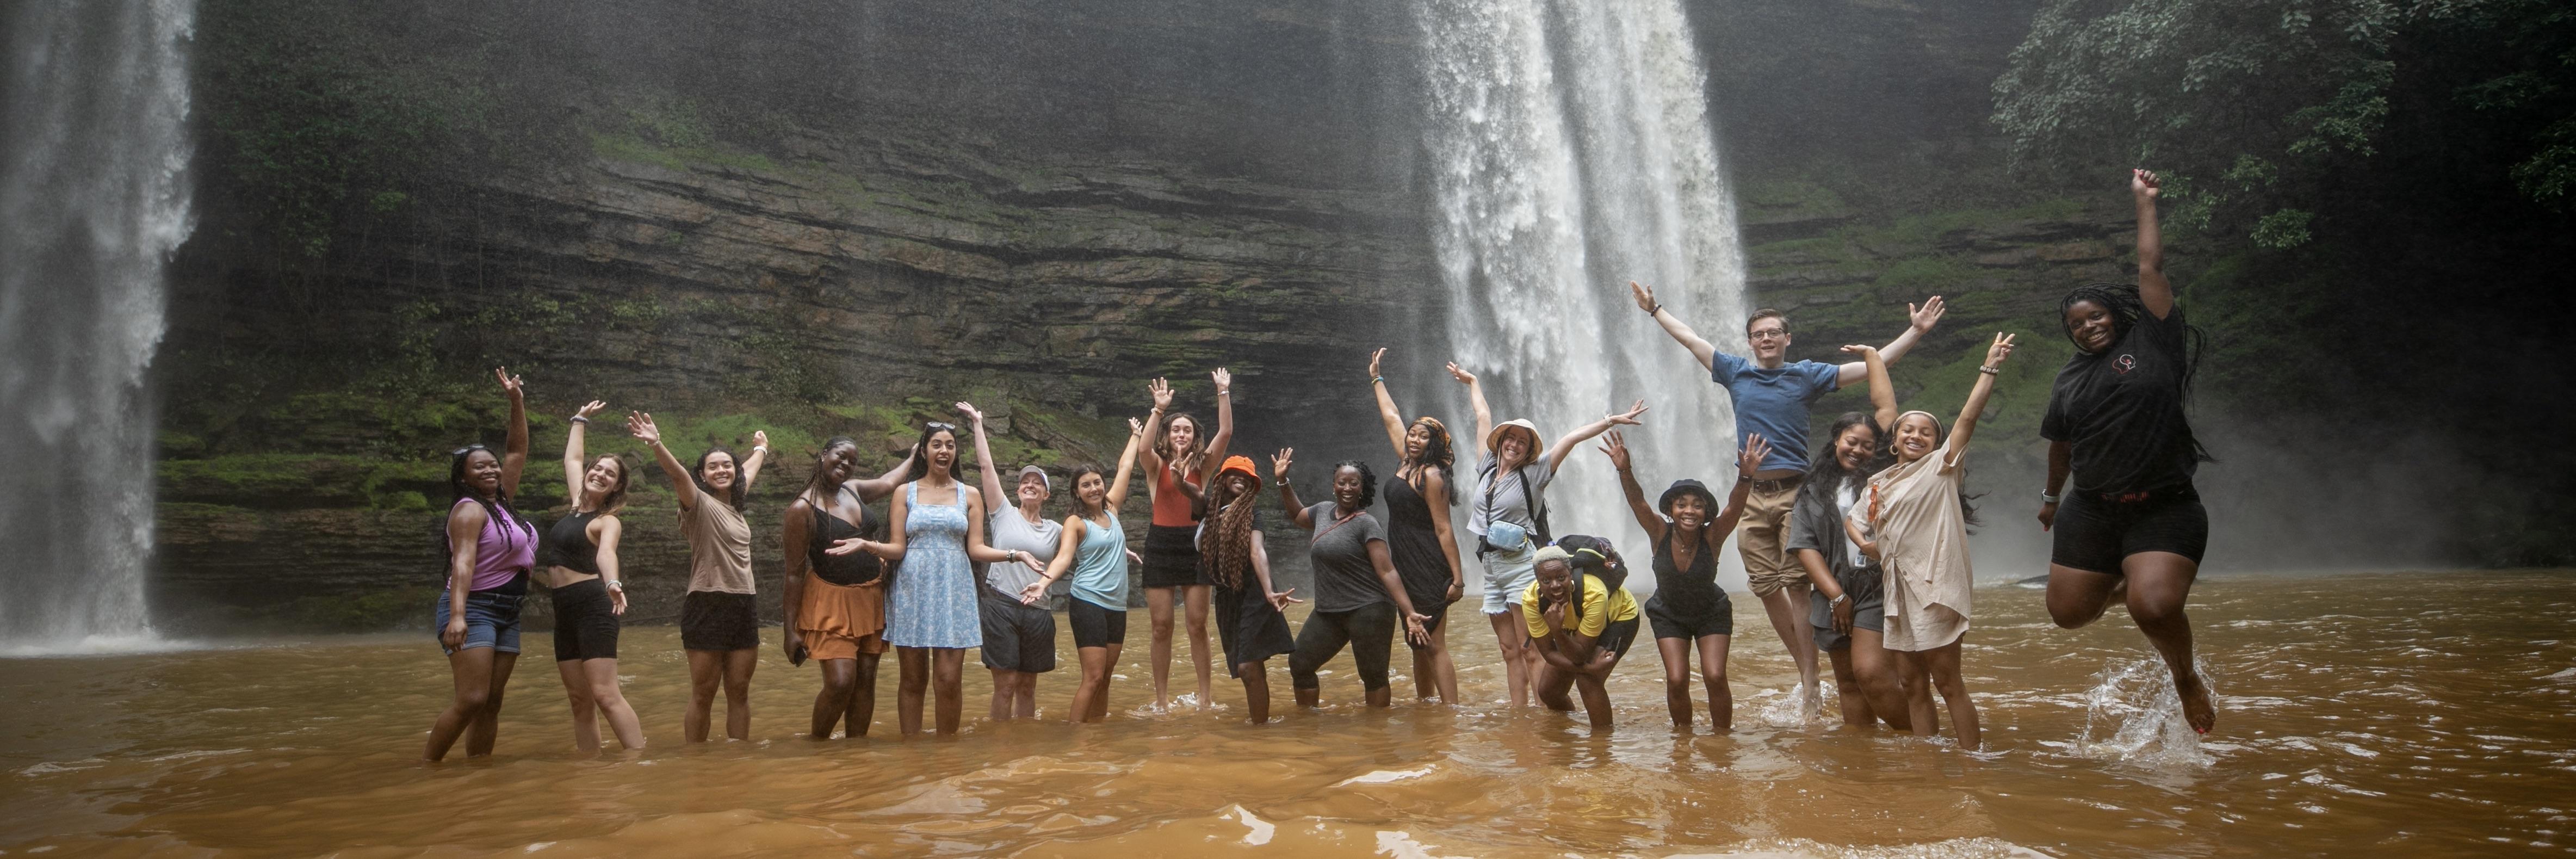 A large group of UMD students stand in a river with a flowing waterfall in the background.